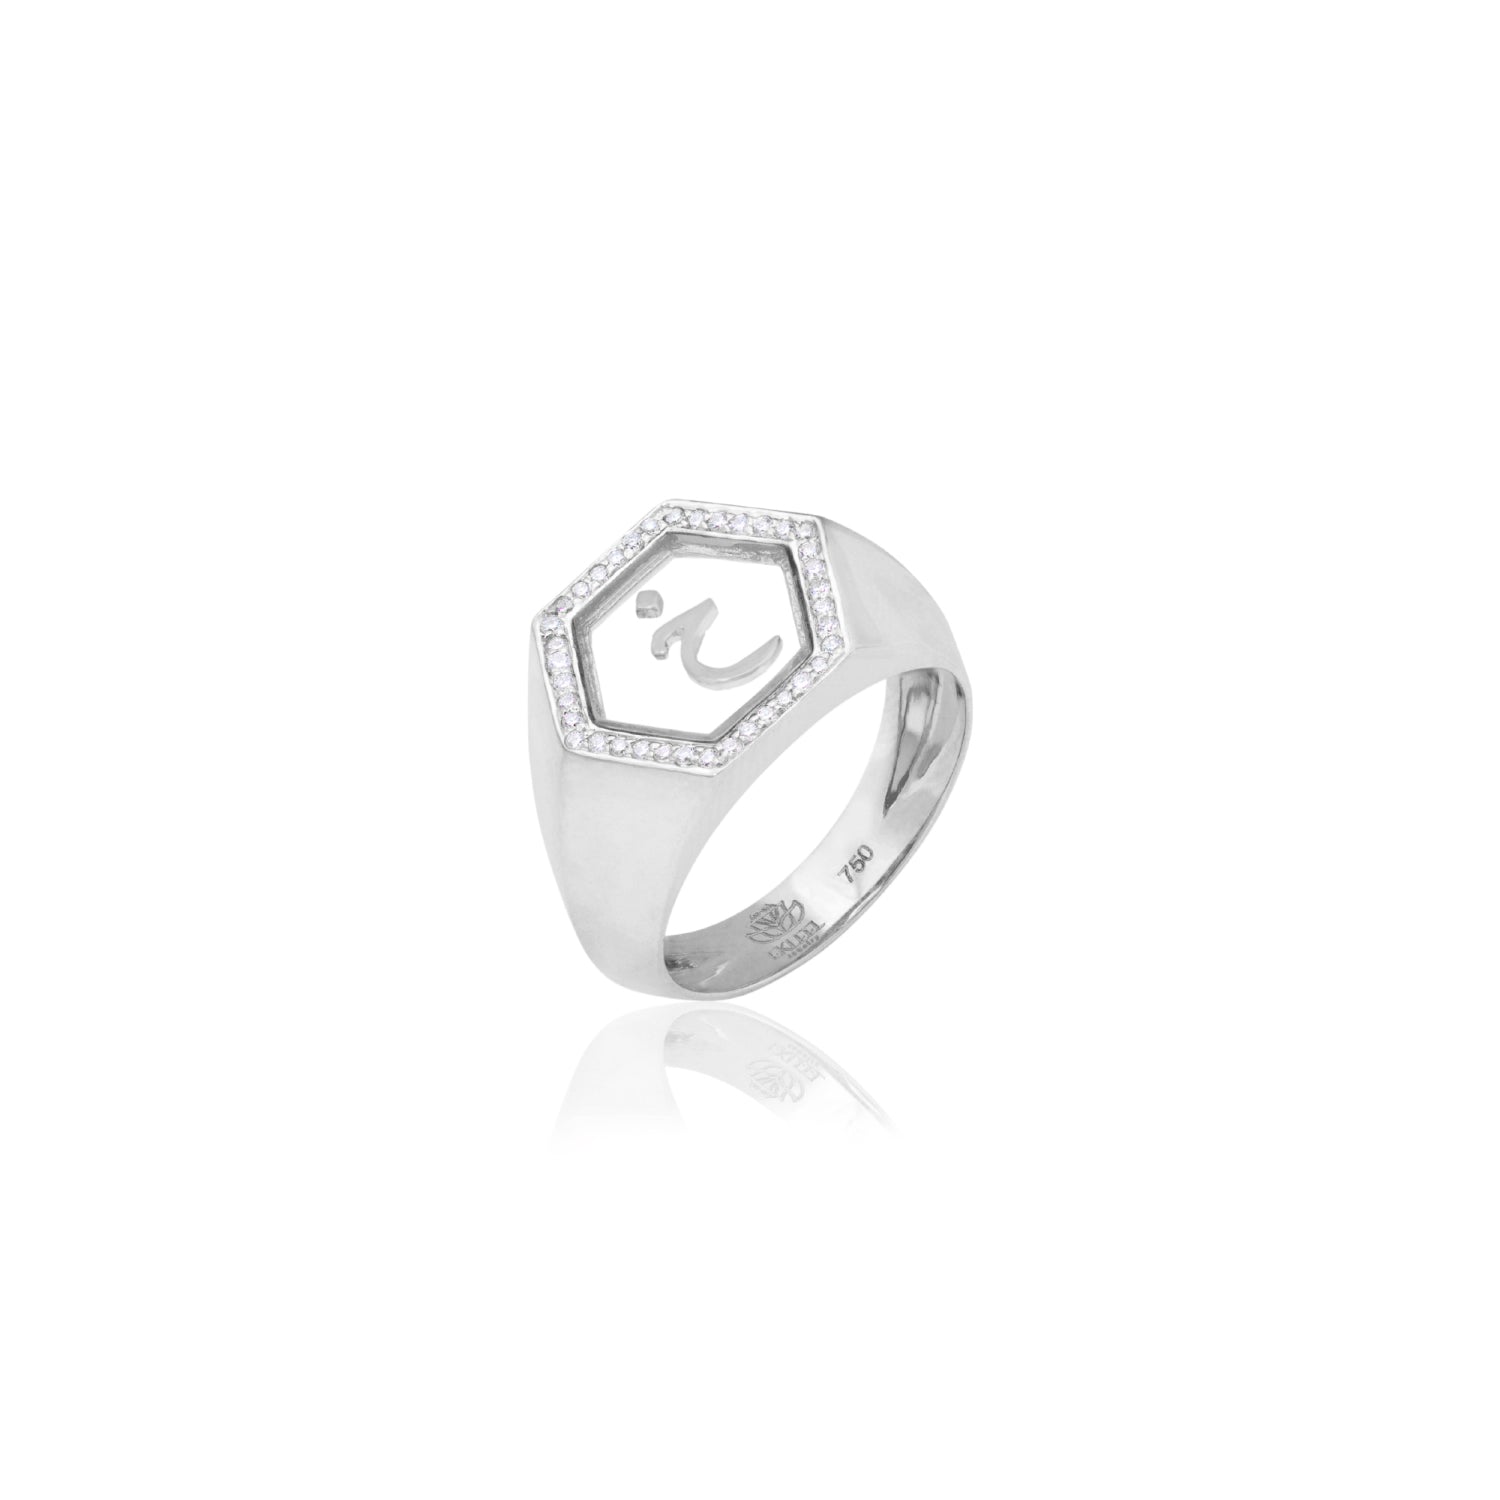 Qamoos 2.0 Letter خ Plexiglass and Diamond Signet Ring in White Gold